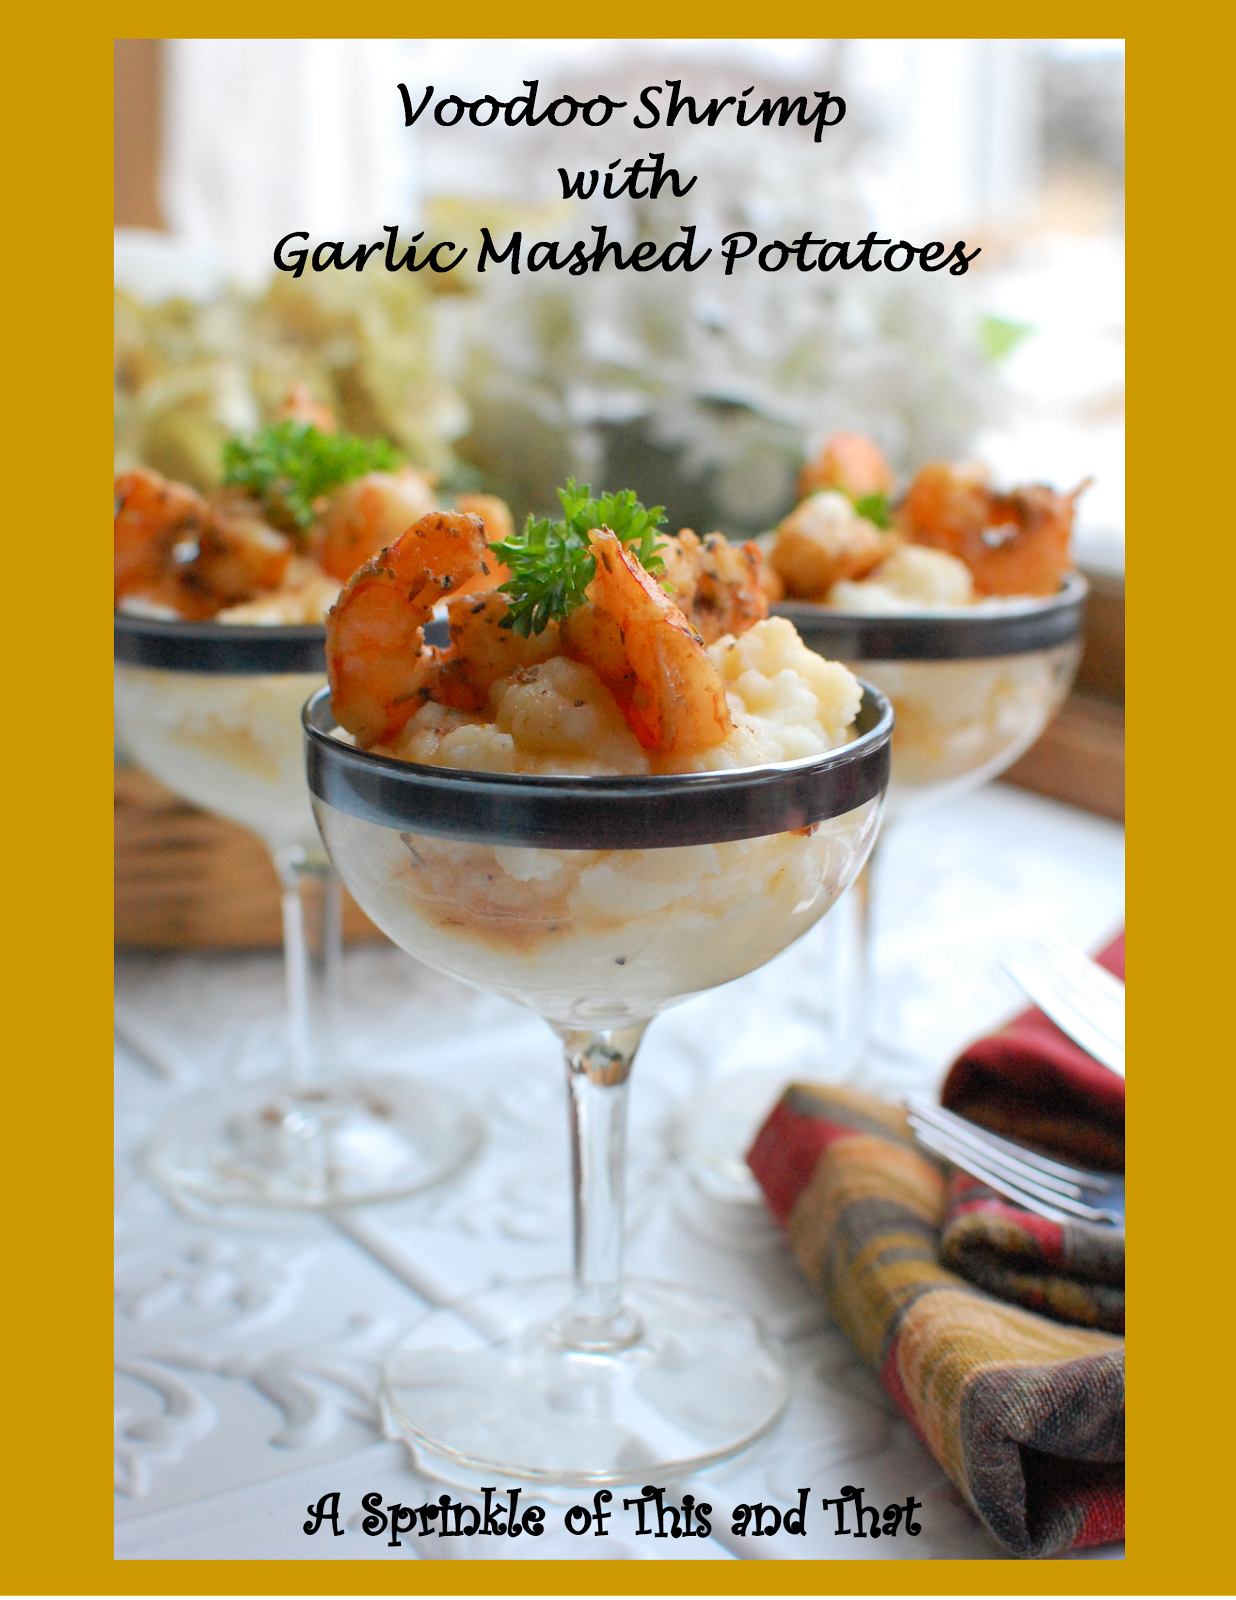 A Sprinkle of This and That: Voodoo Shrimp and Garlic Mashed Potatoes